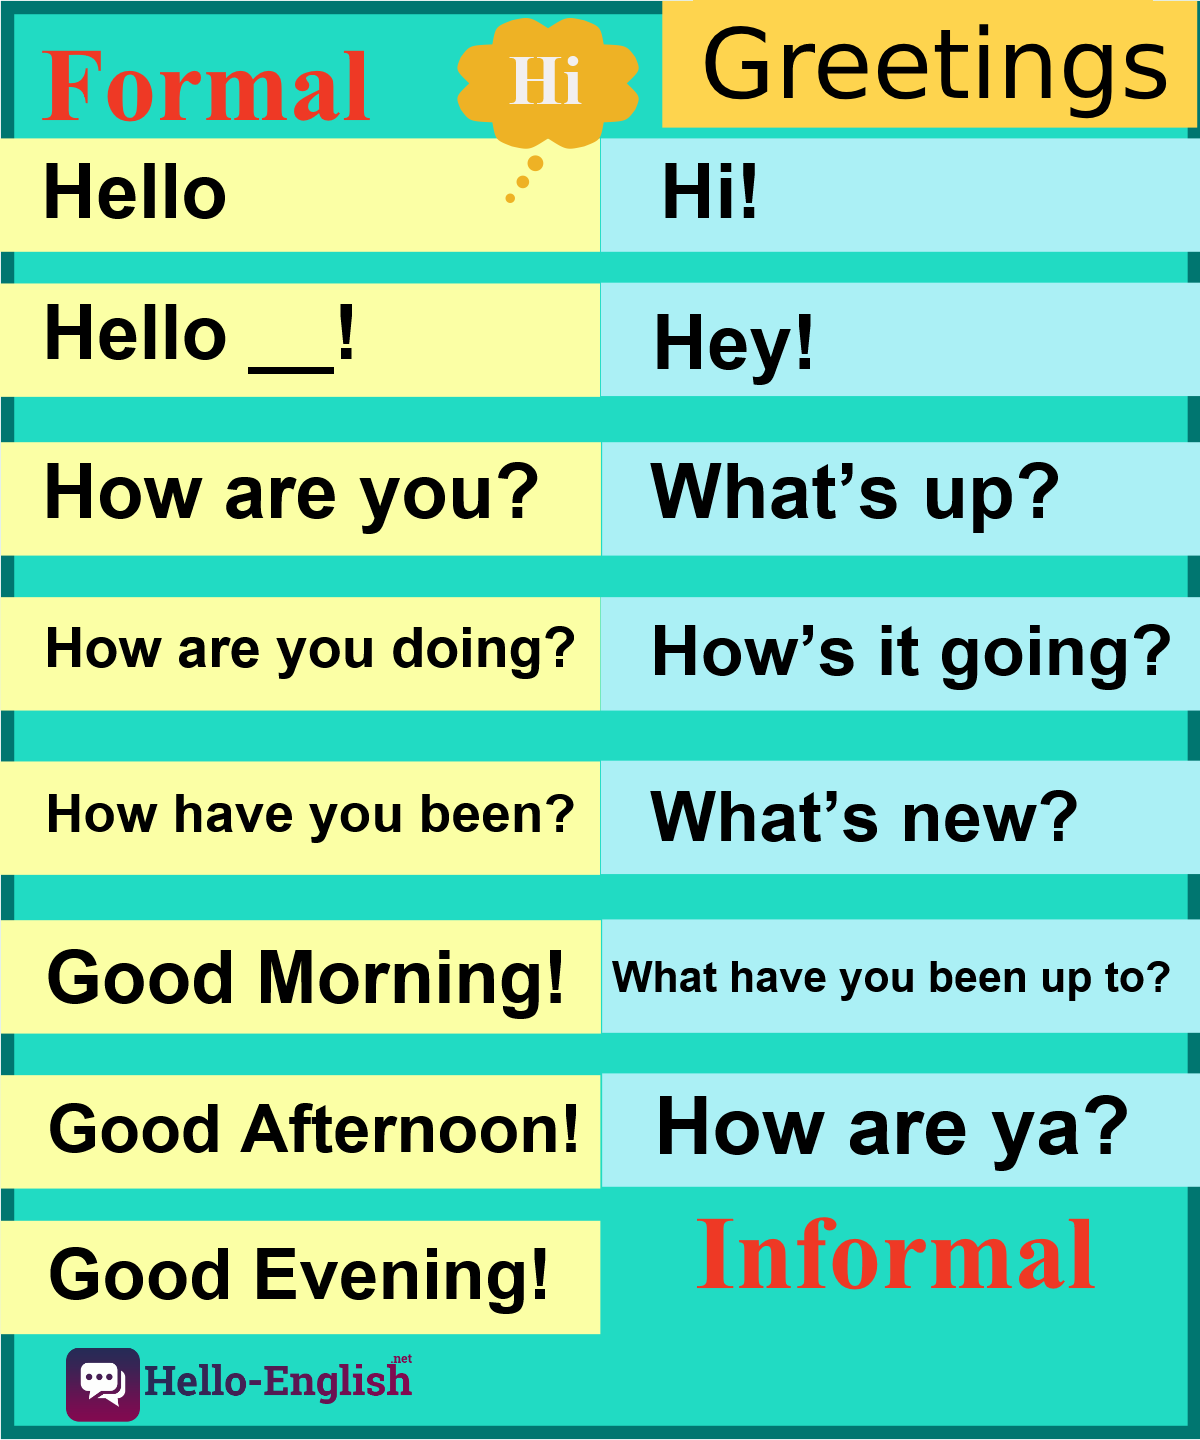 formal-and-informal-greetings-in-english-hello-english